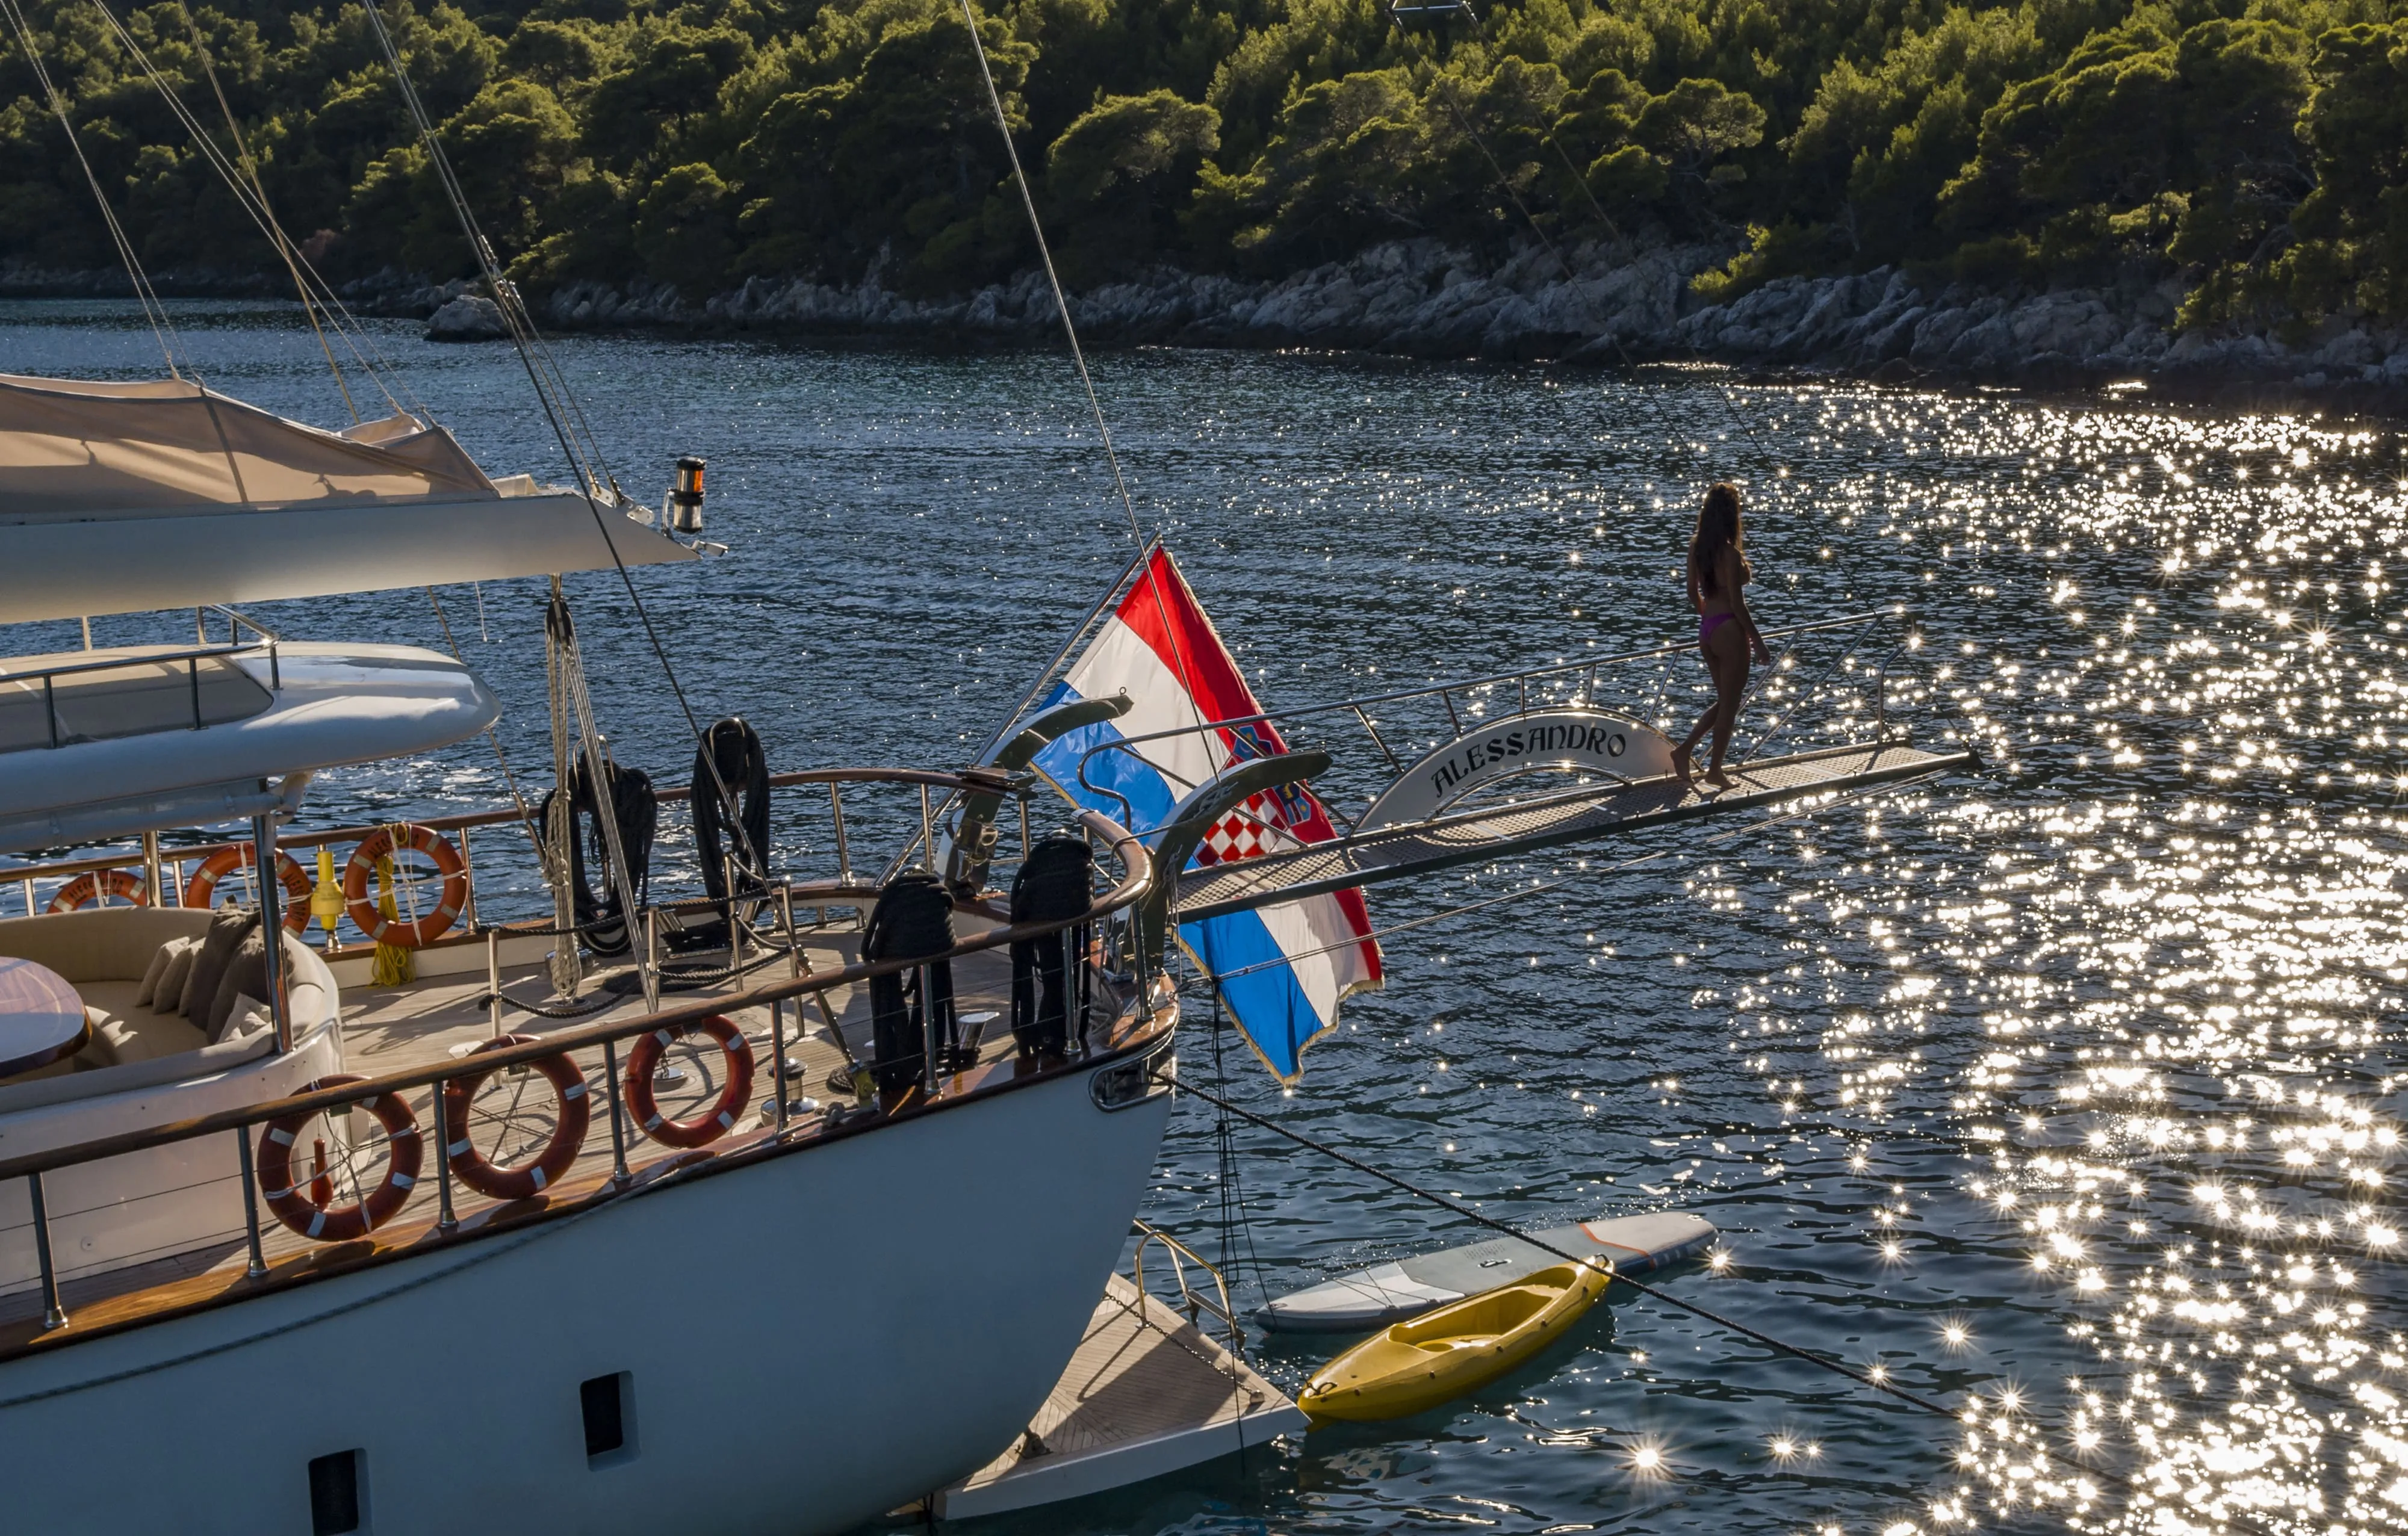 6 Reasons Why August is the Best Time to Visit Croatia Aboard a Yacht